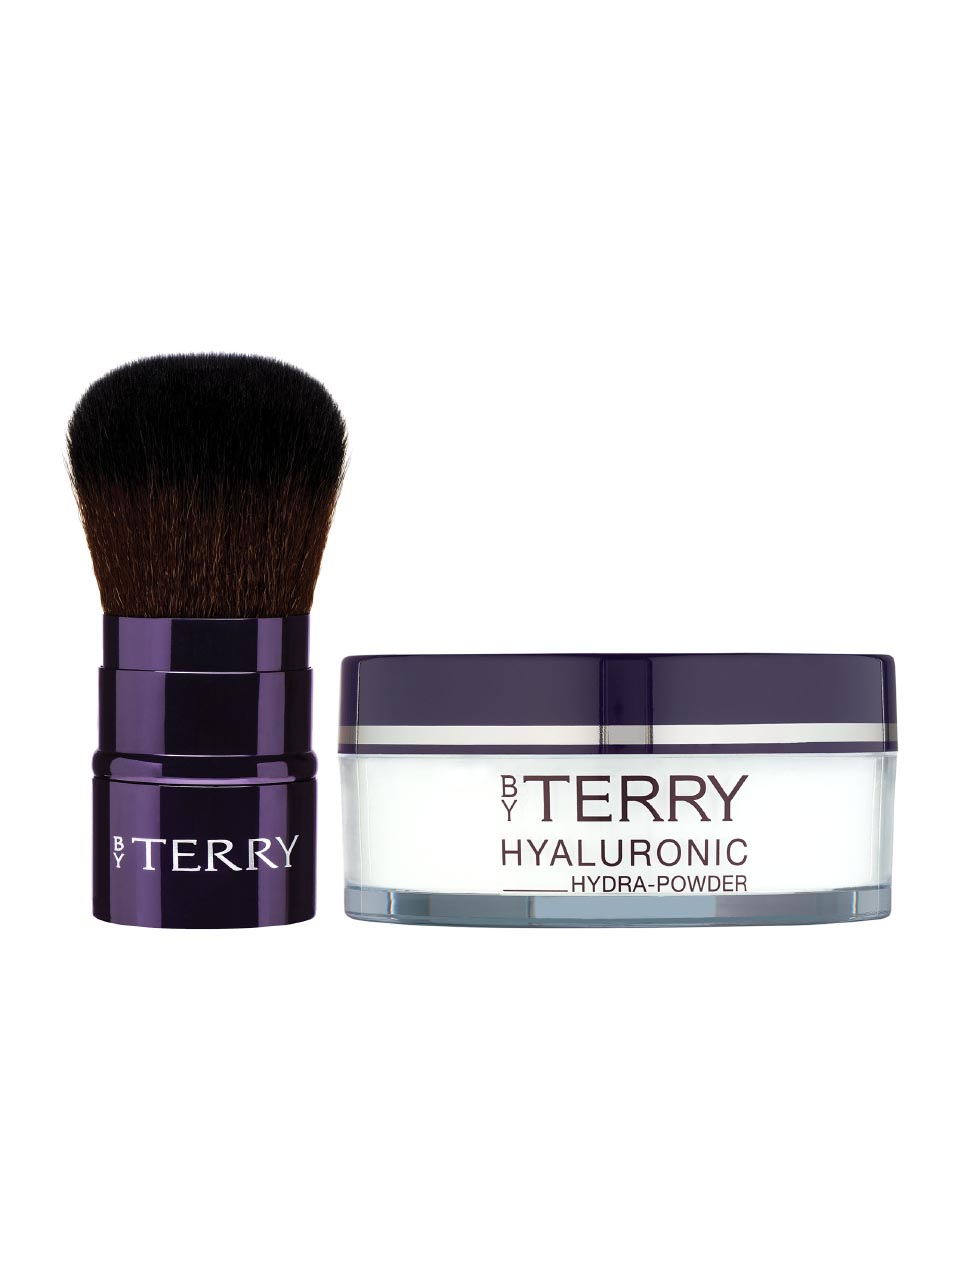 By Terry Make Up Set null - onesize - 1